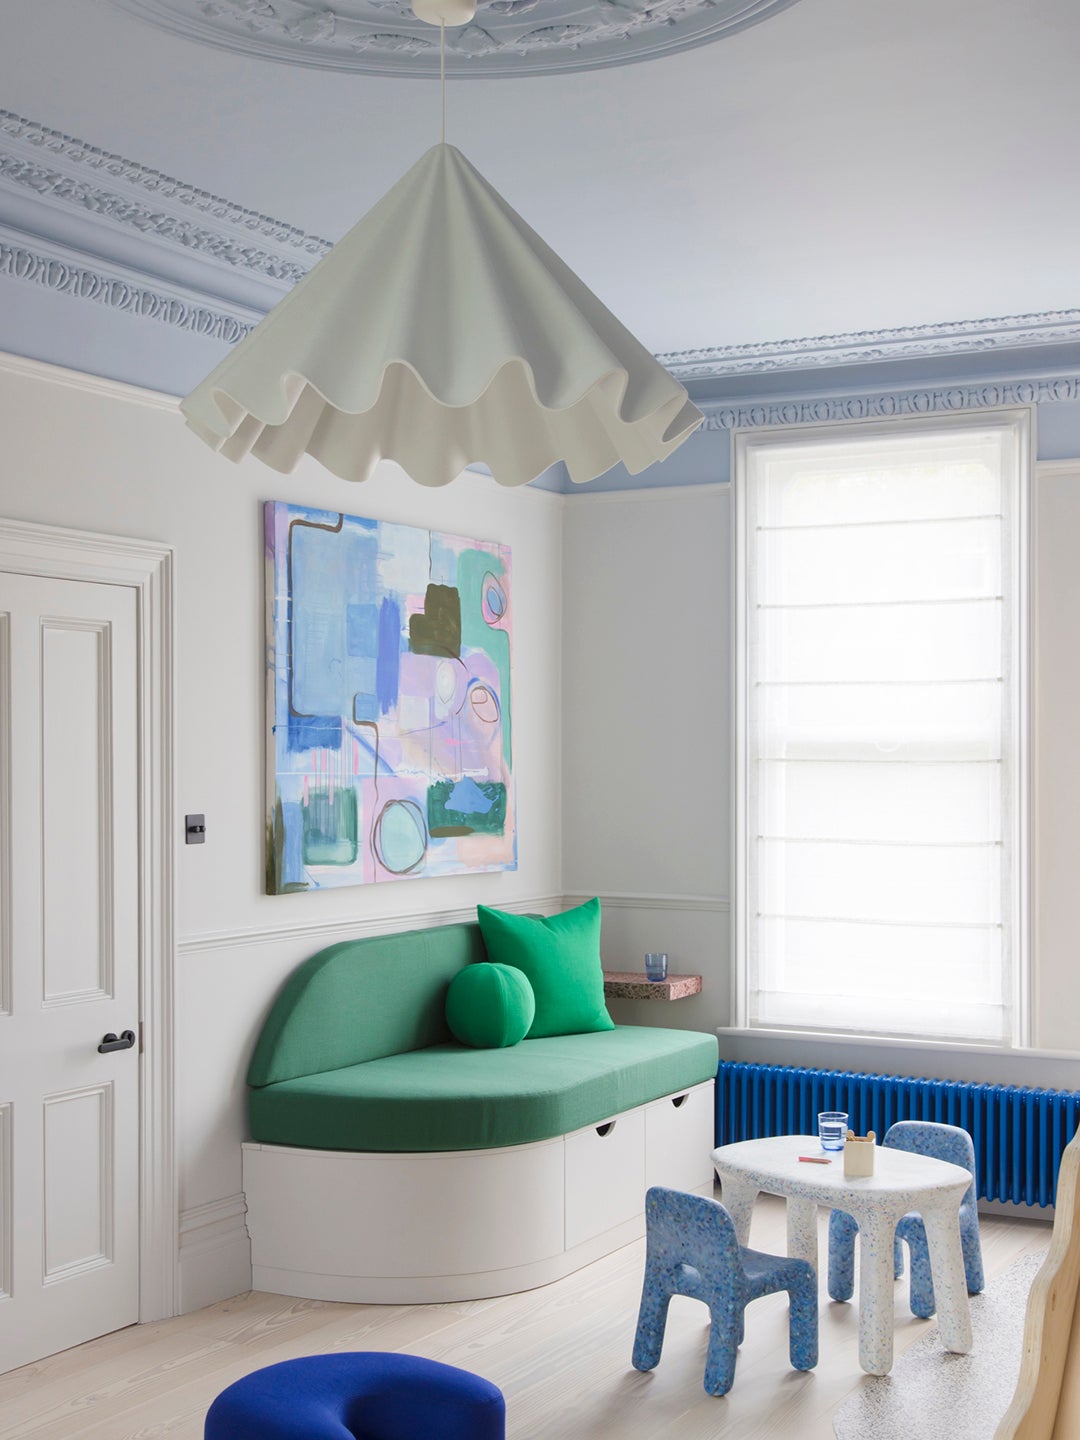 Kids' room with frilly white pendant lamp and green banquette sofa.